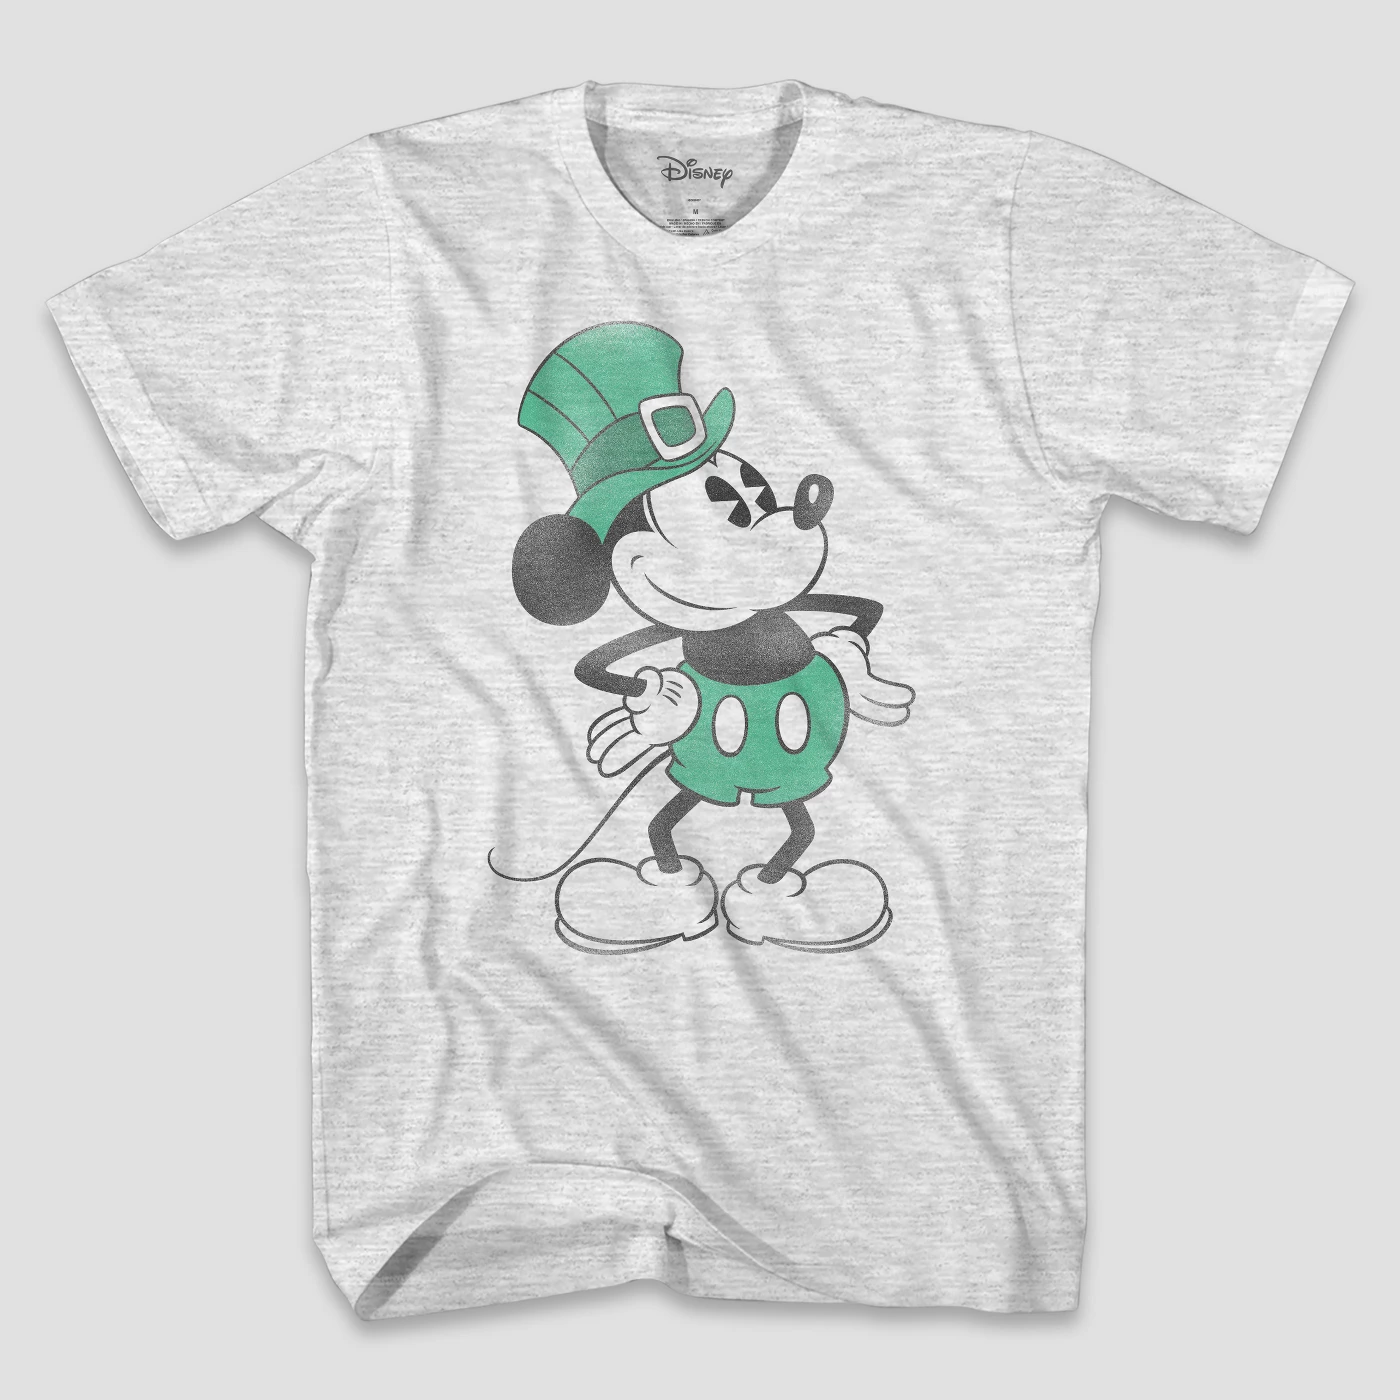 Men's Disney Mickey Mouse Short Sleeve Graphic T-Shirt - Ash - image 1 of 1